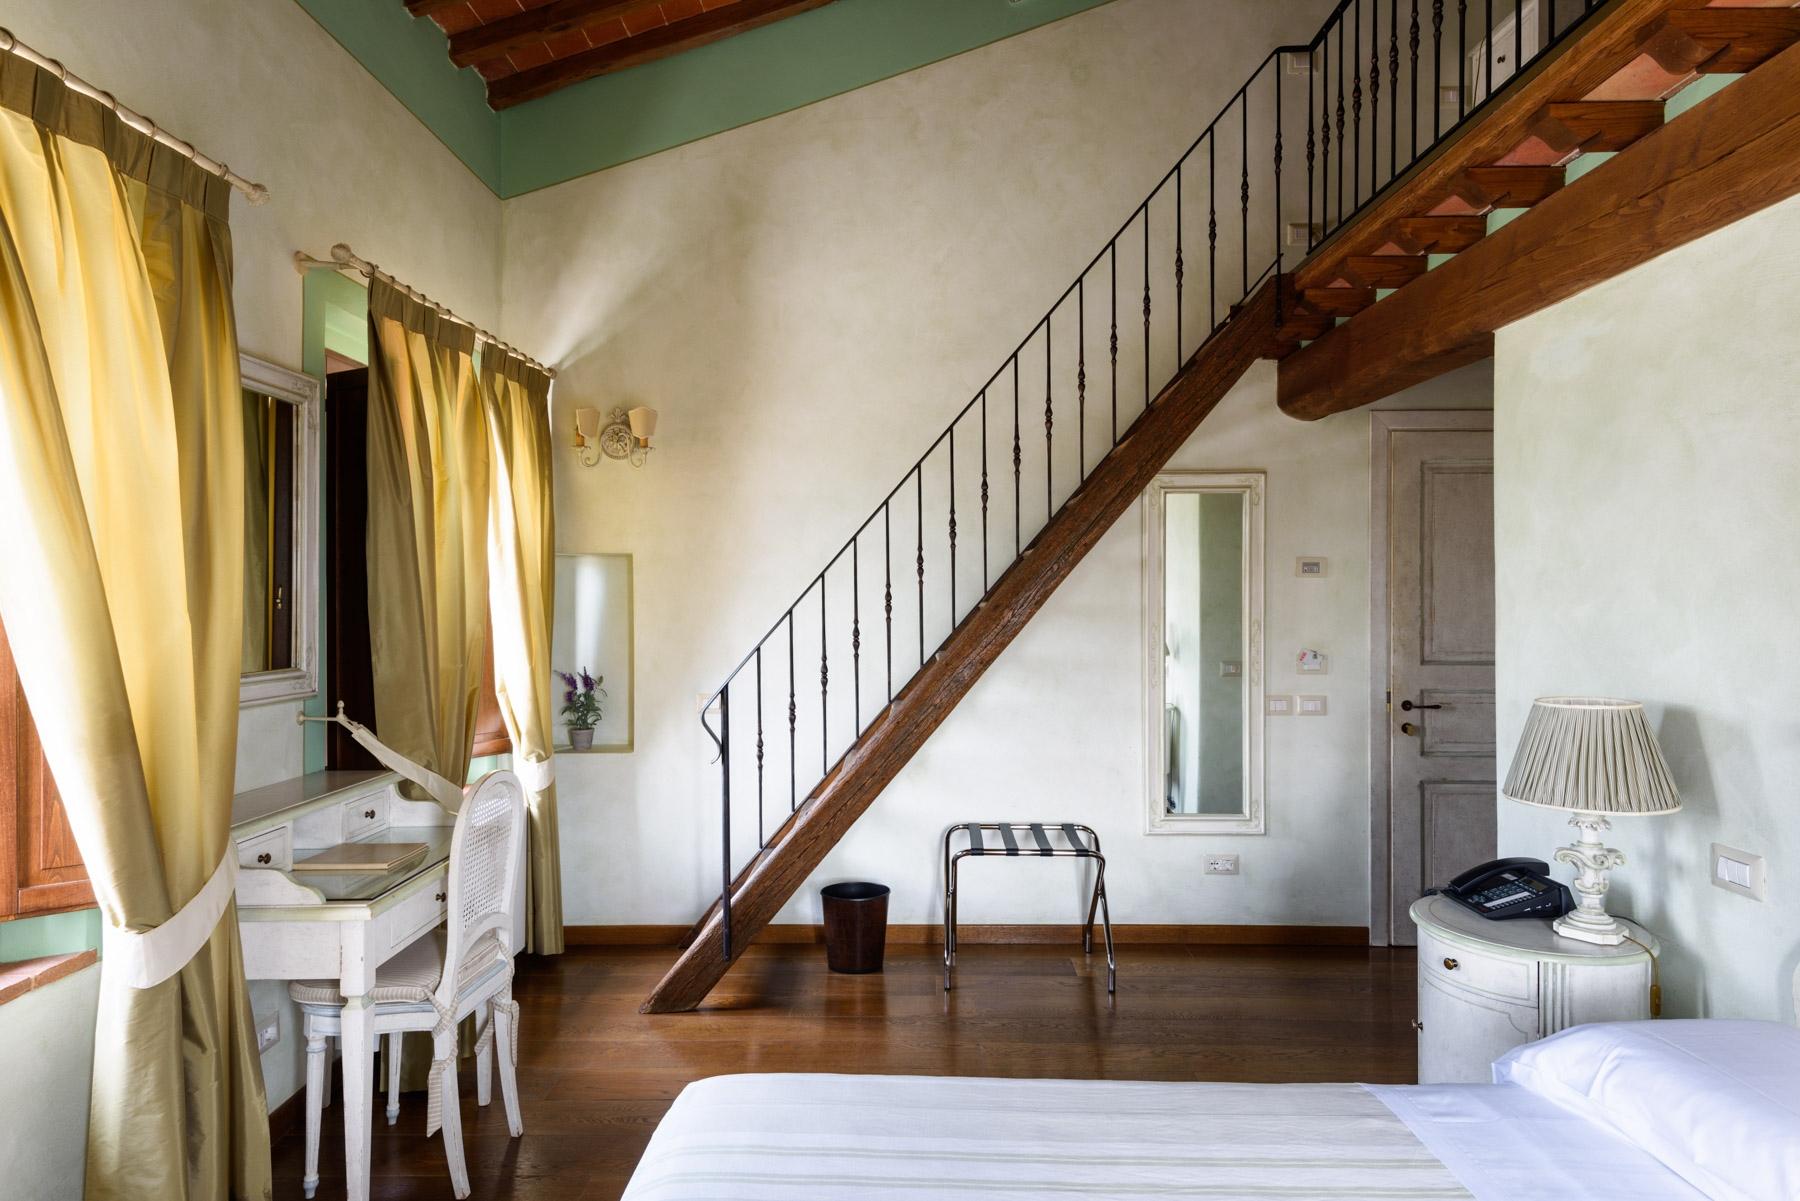 Country hotel with adjacent private villa near Siena - 13